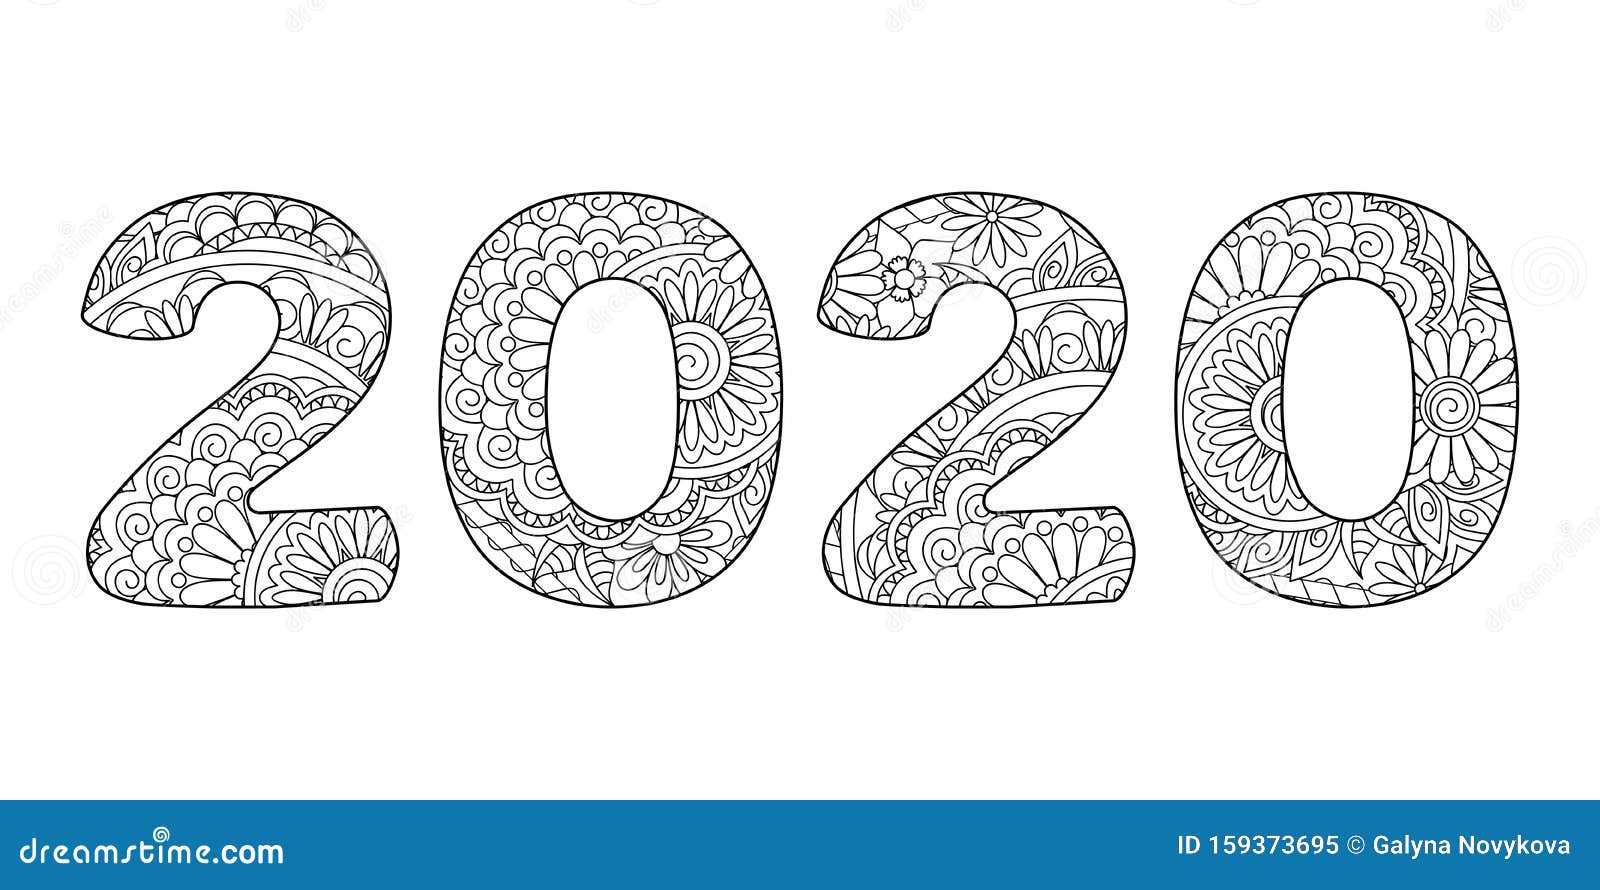 Download Small Number 2020 Patterned With Tangled Mandalas And ...